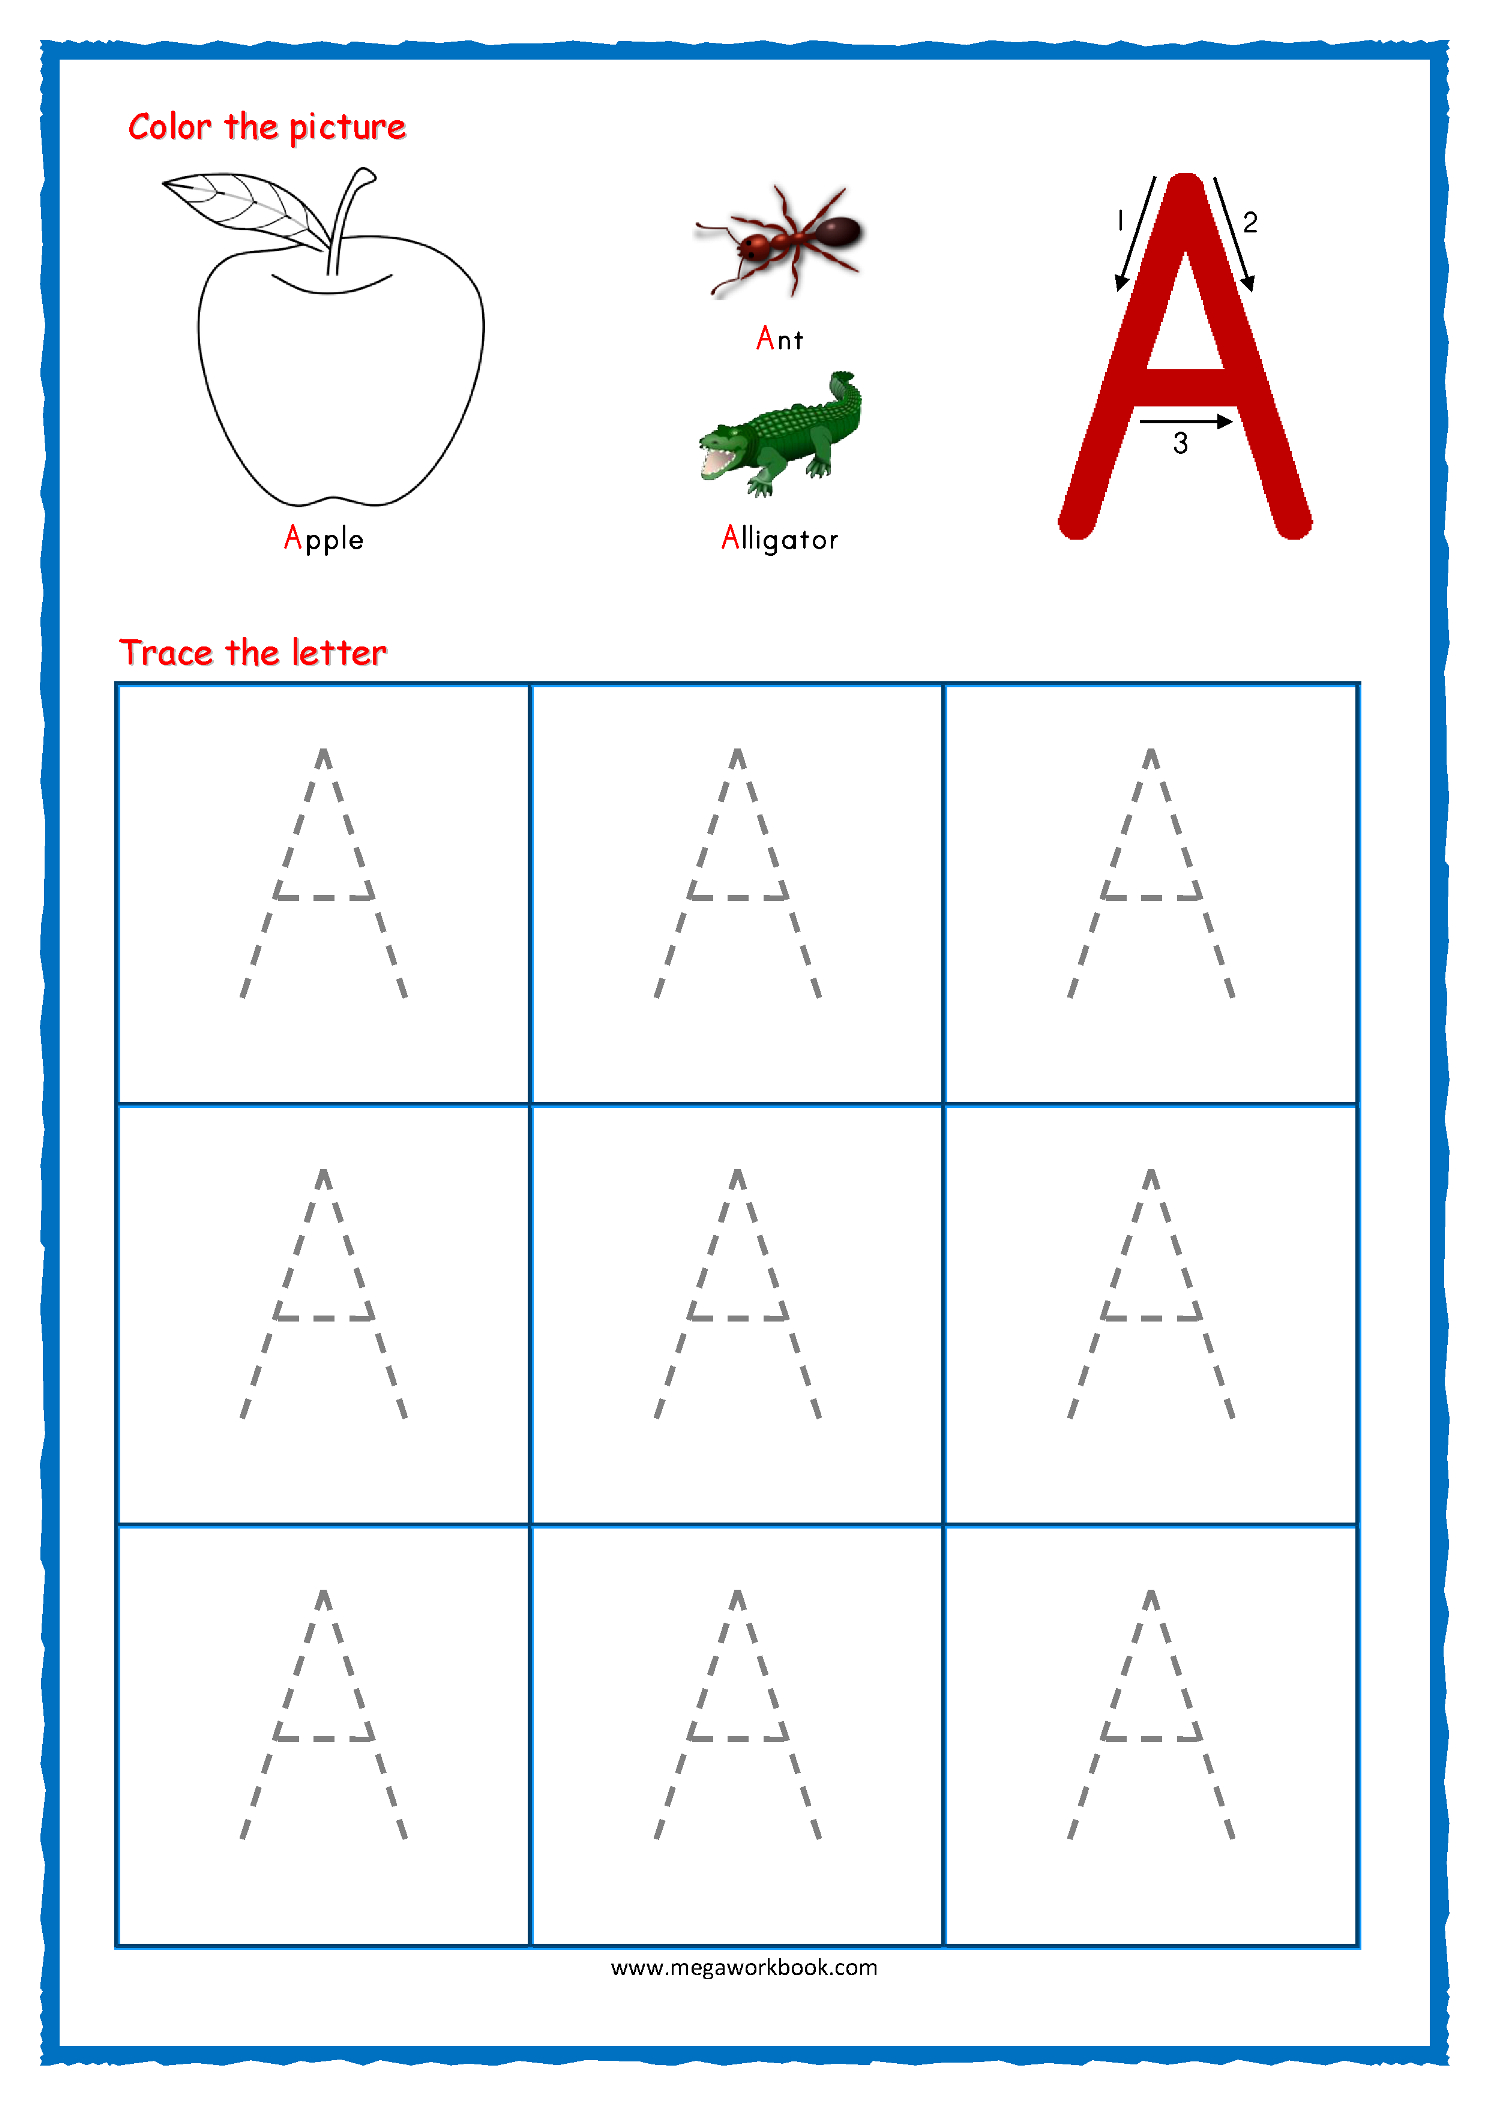 31 Creative Letter Tracing Worksheets 16